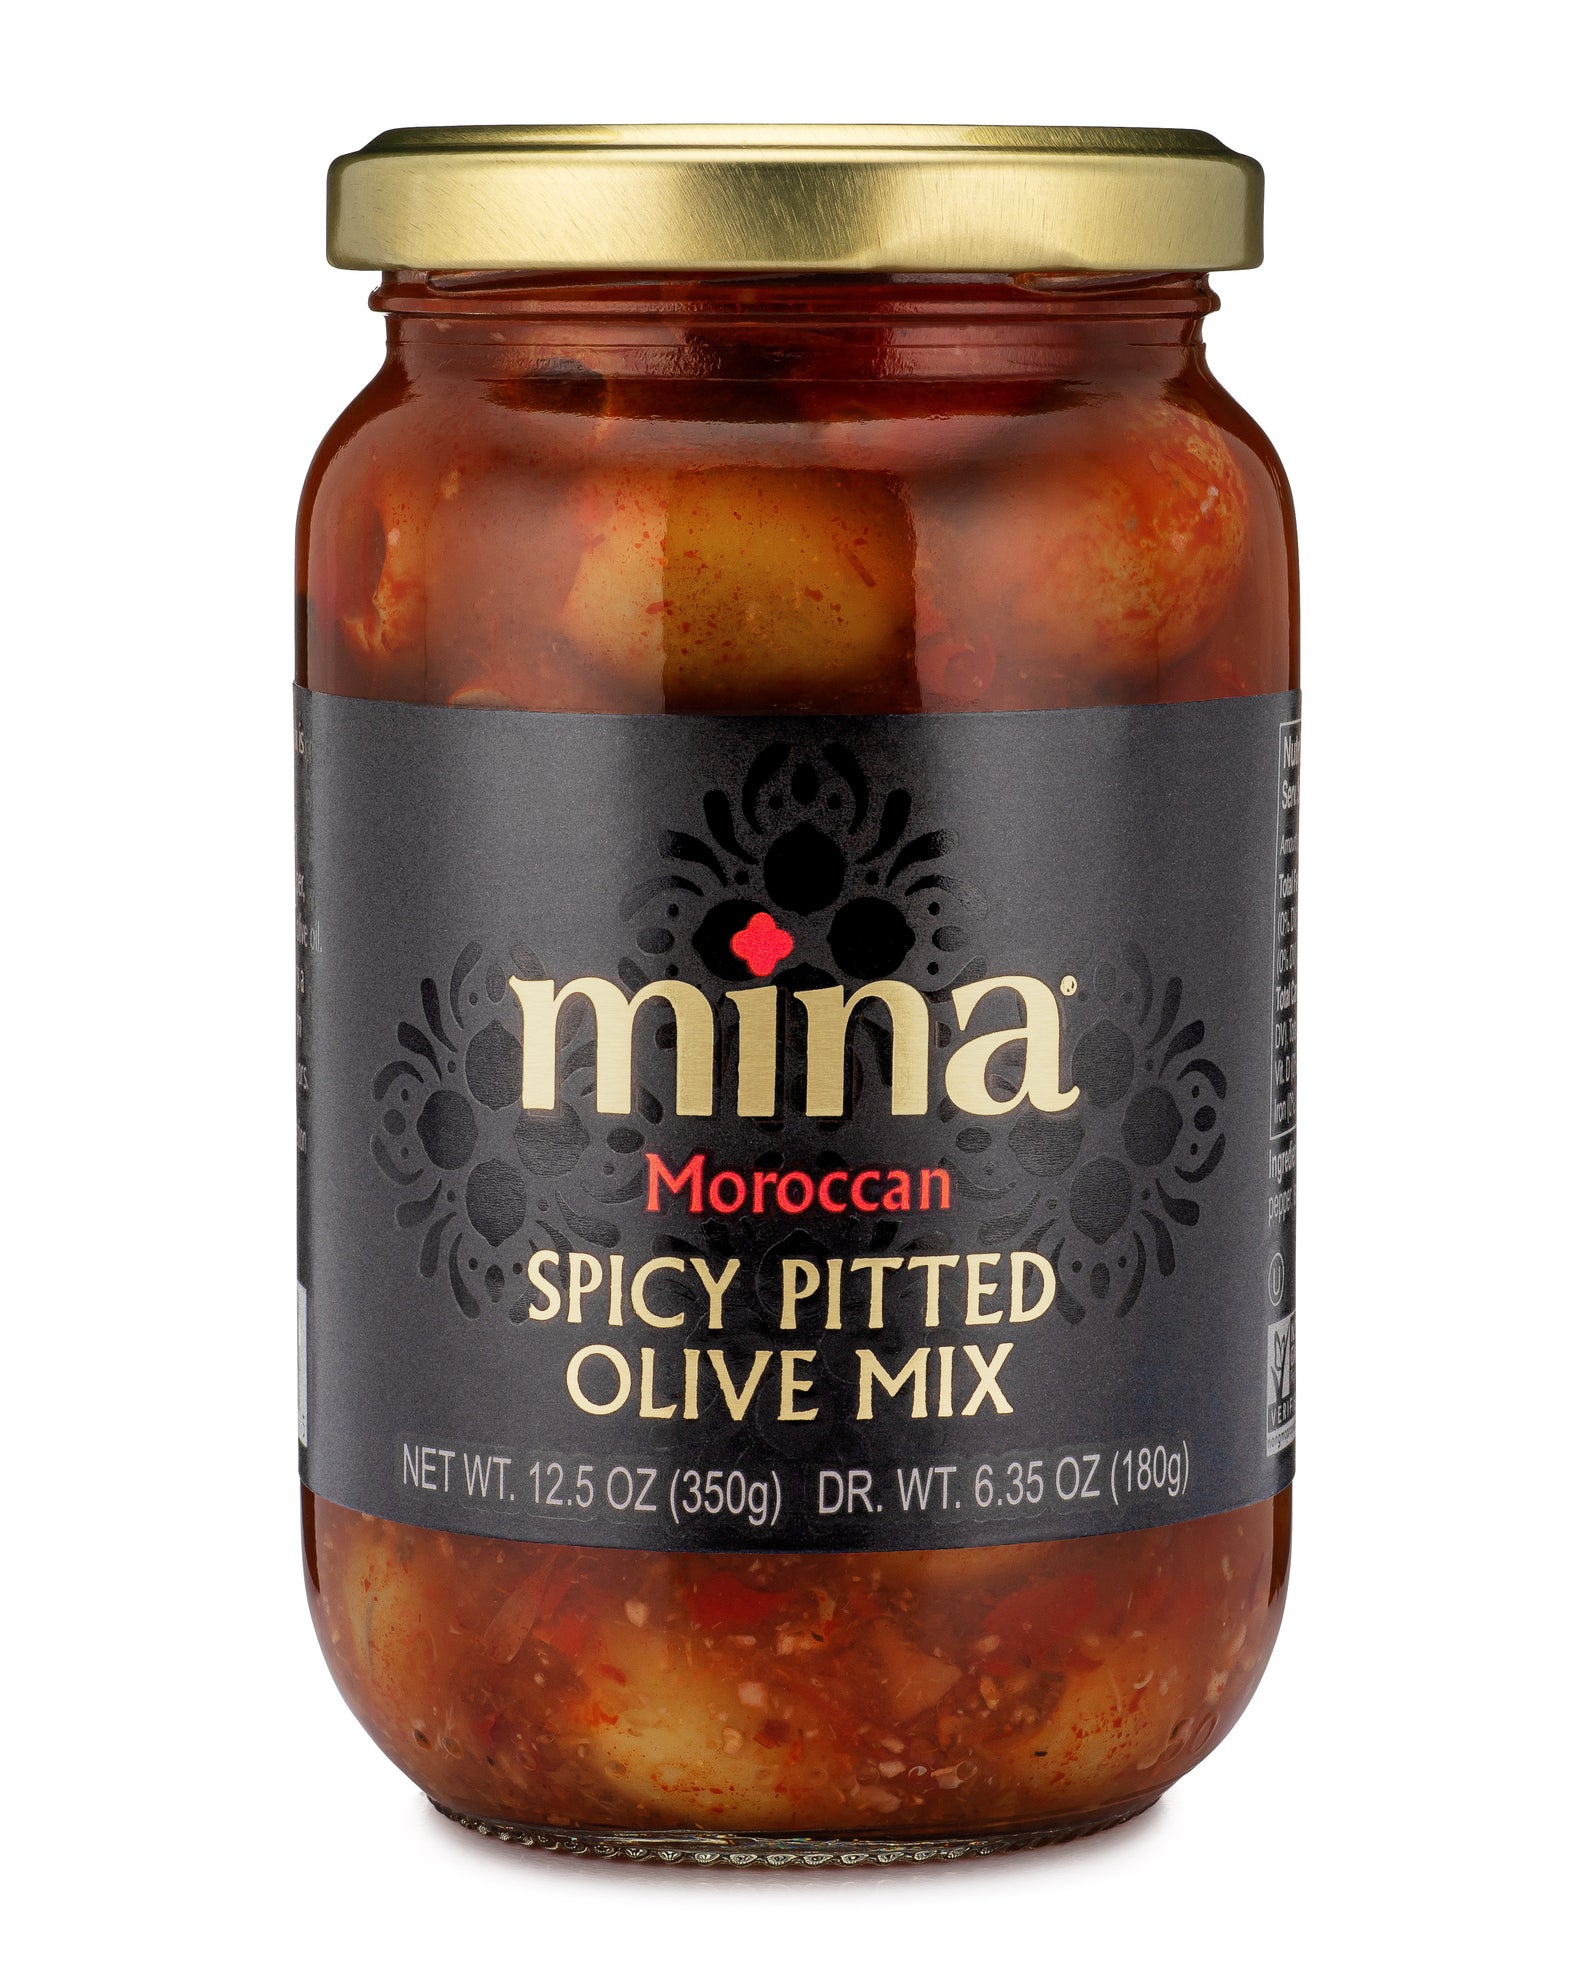 Spicy Pitted Olive Mix